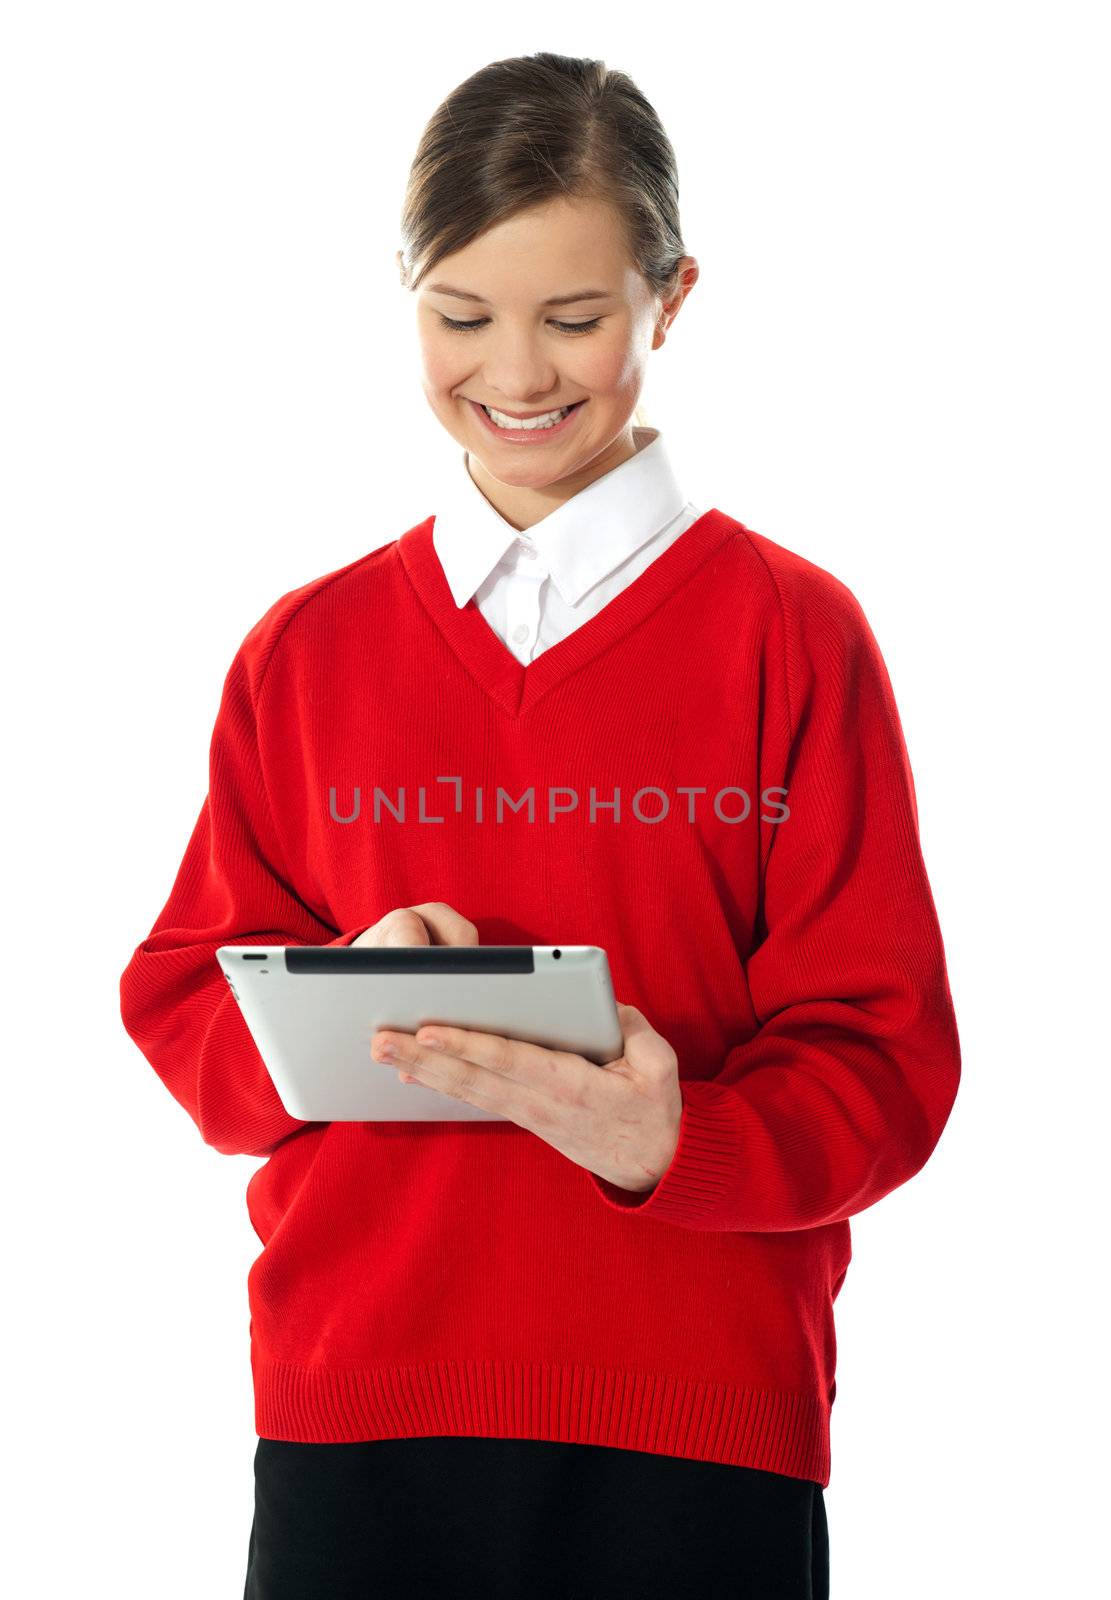 School girl using new touch pad device. Isolated on white